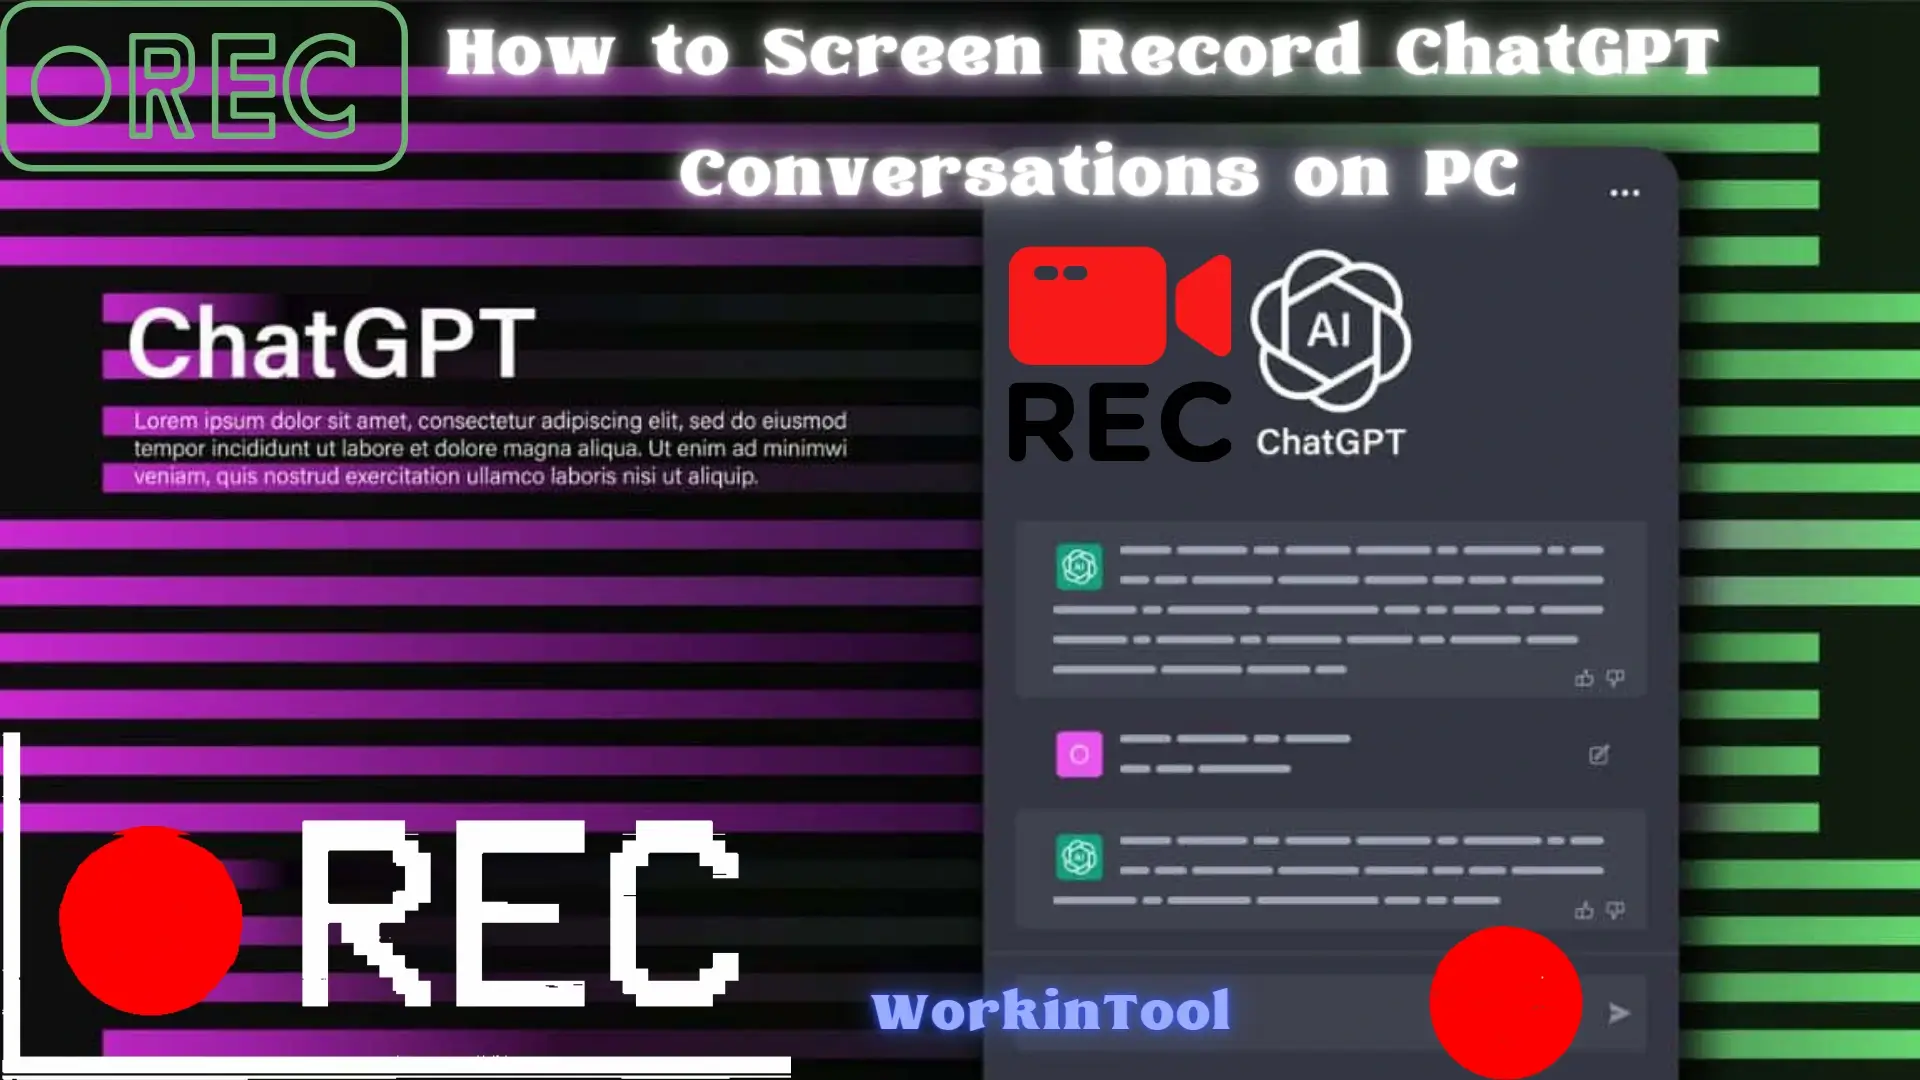 featured image for how to screen record chatgpt conversations